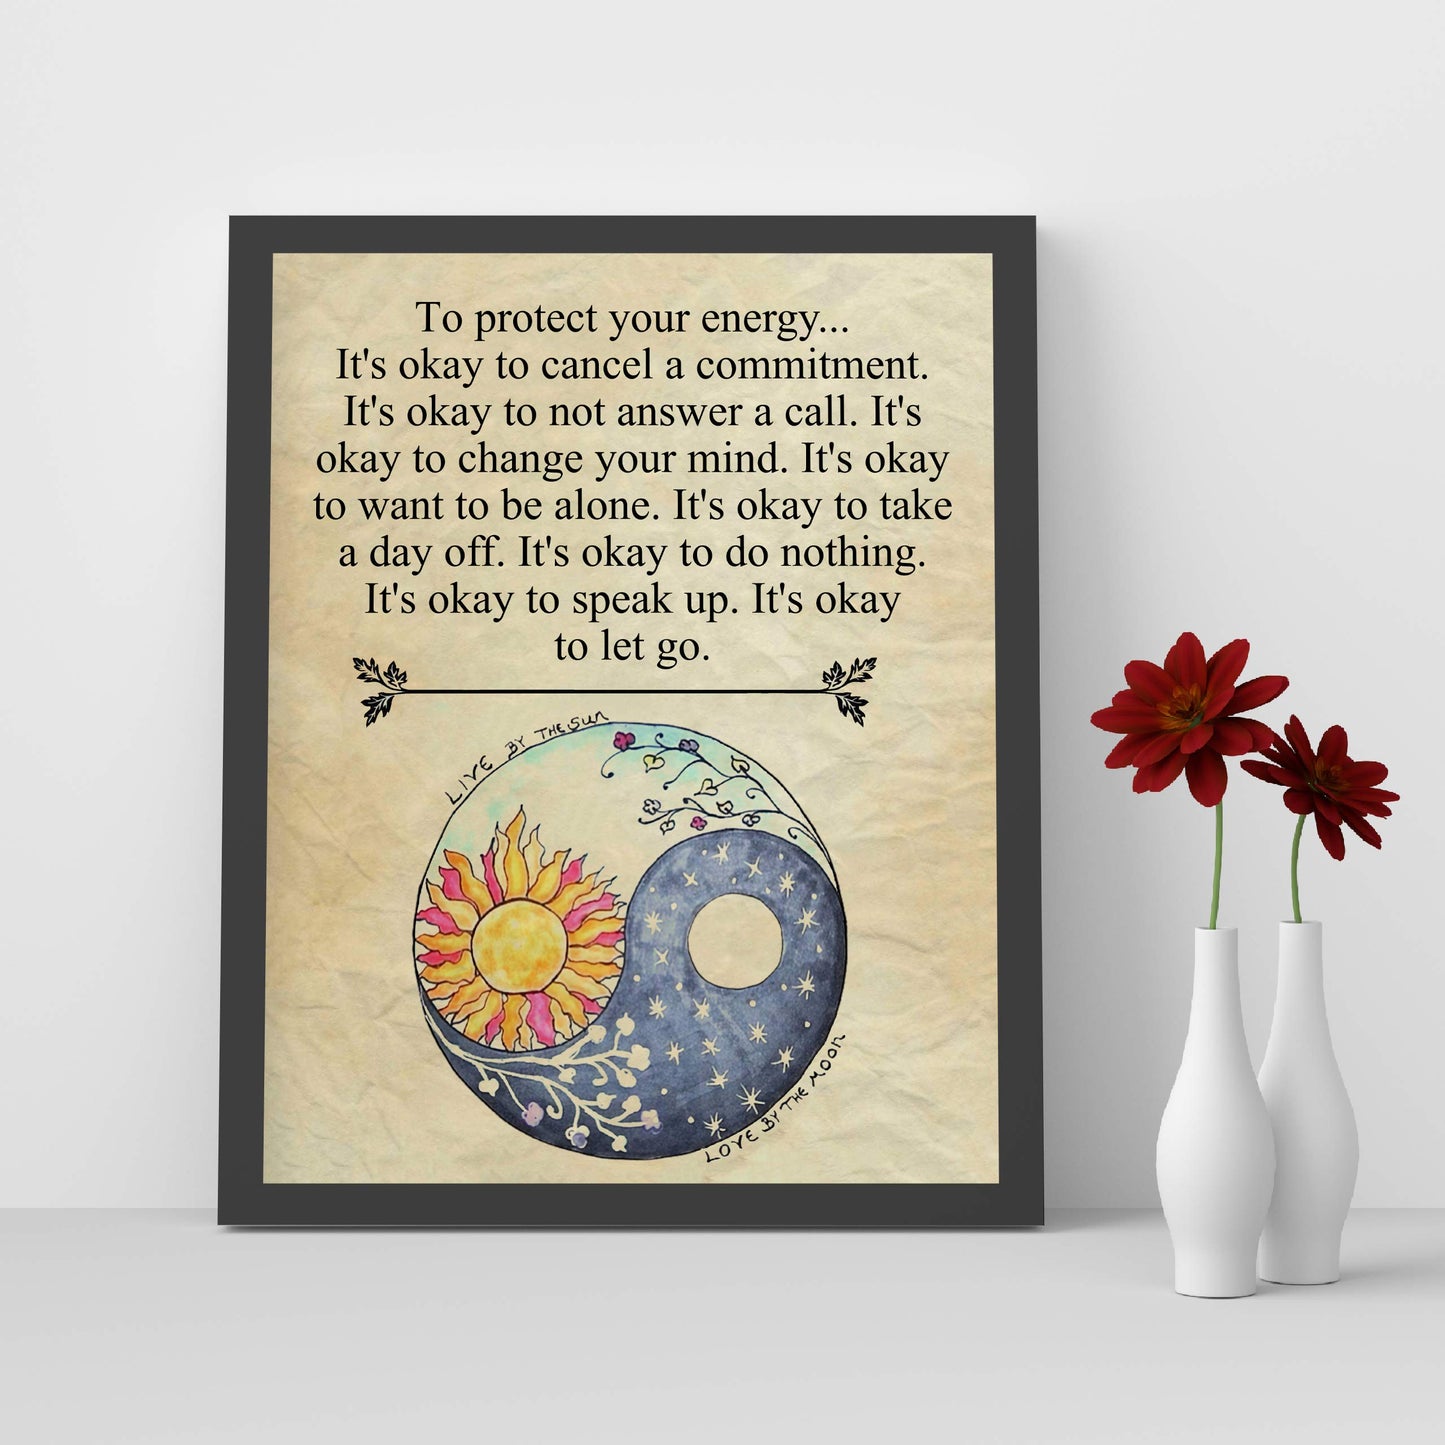 To Protect You - Inspirational Quotes Wall Decor, Motivational Modern Zen Parchment Wall Art Print Is Ideal For Living Room Decor, Office Decor, Home Decor, or Room Decor Aesthetic, Unframed - 8x10